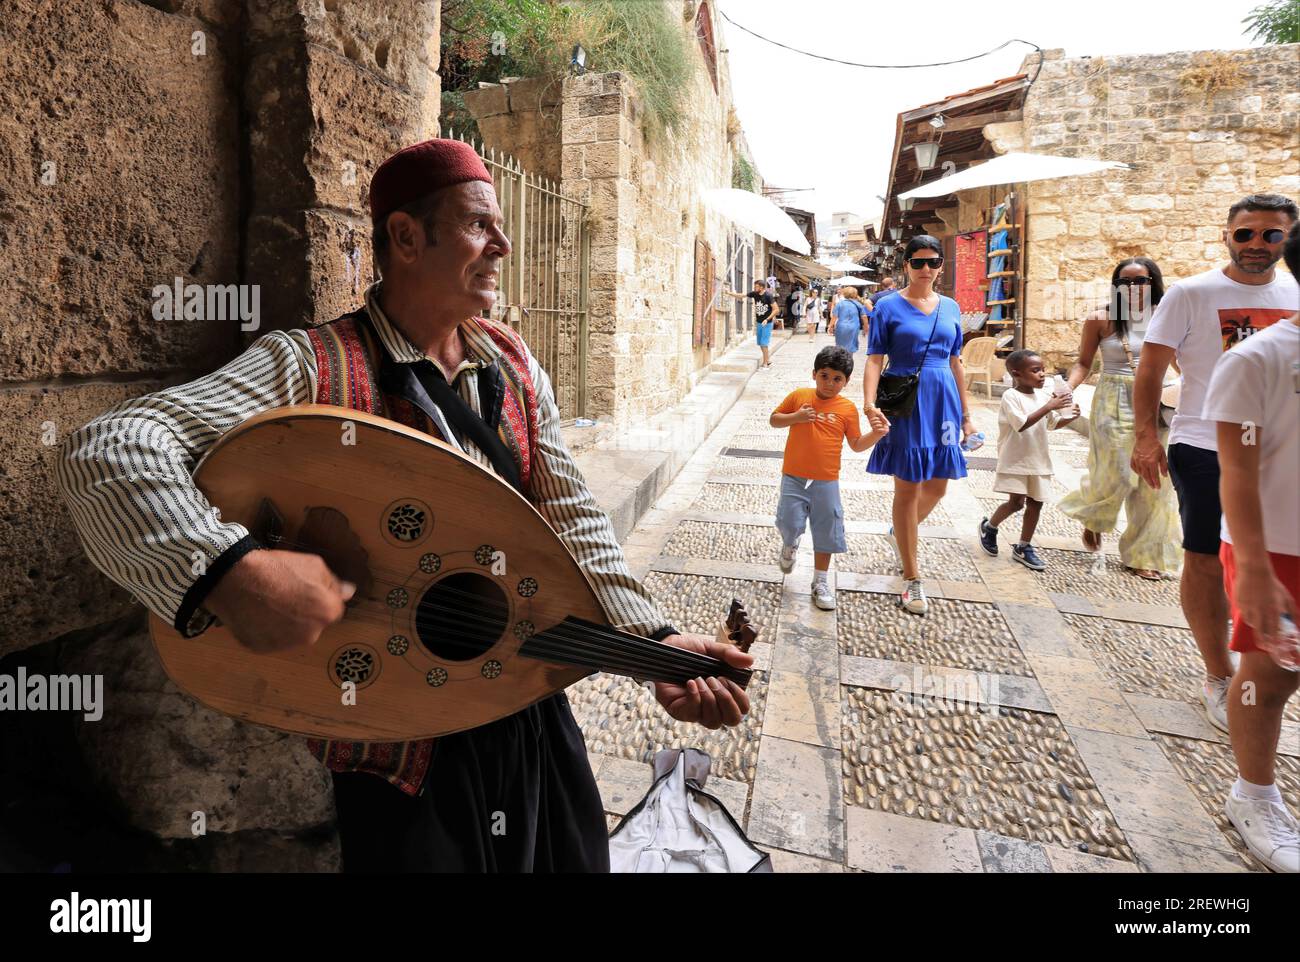 Beirut, Lebanon. 29th July, 2023. A busker performs as tourists walk by in Byblos, Lebanon, July 29, 2023. Lebanon's tourism season has exceeded all expectations, the National News Agency reported on Thursday, citing opinions of industry experts. Credit: Liu Zongya/Xinhua/Alamy Live News Stock Photo